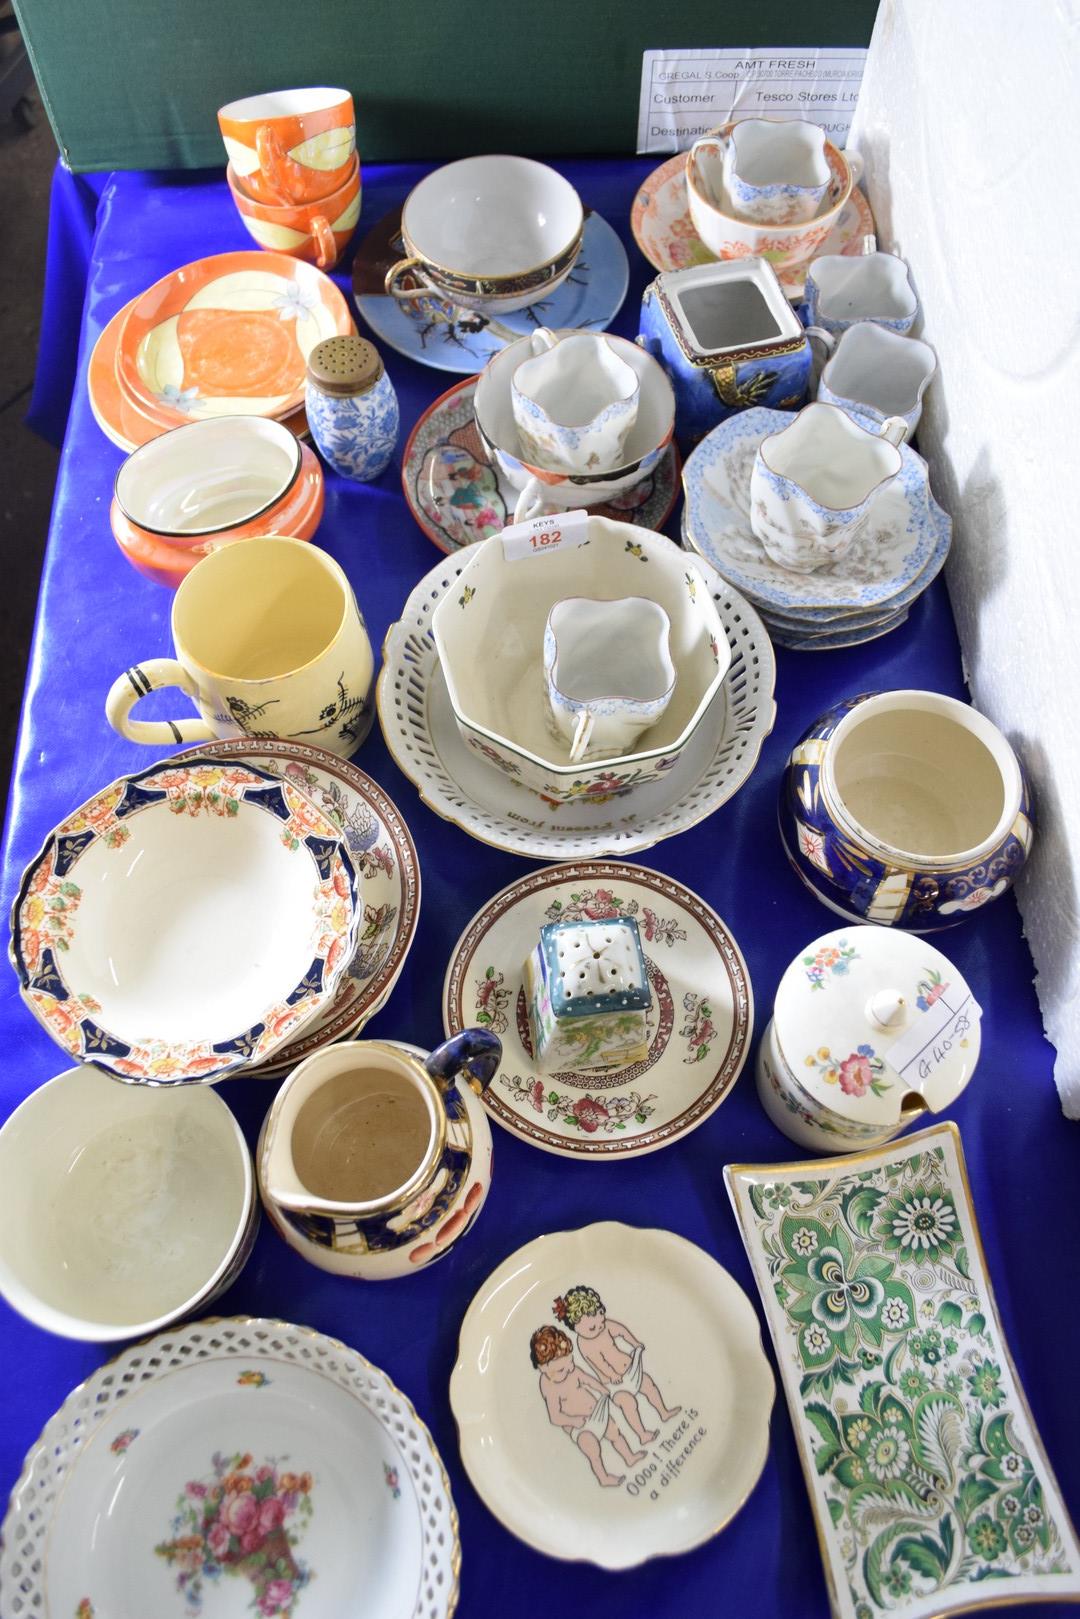 MIXED LOT OF JAPANESE PORCELAIN CUPS AND SAUCERS, ENGLISH TEA WARES, 20TH CENTURY GERMAN BOWLS